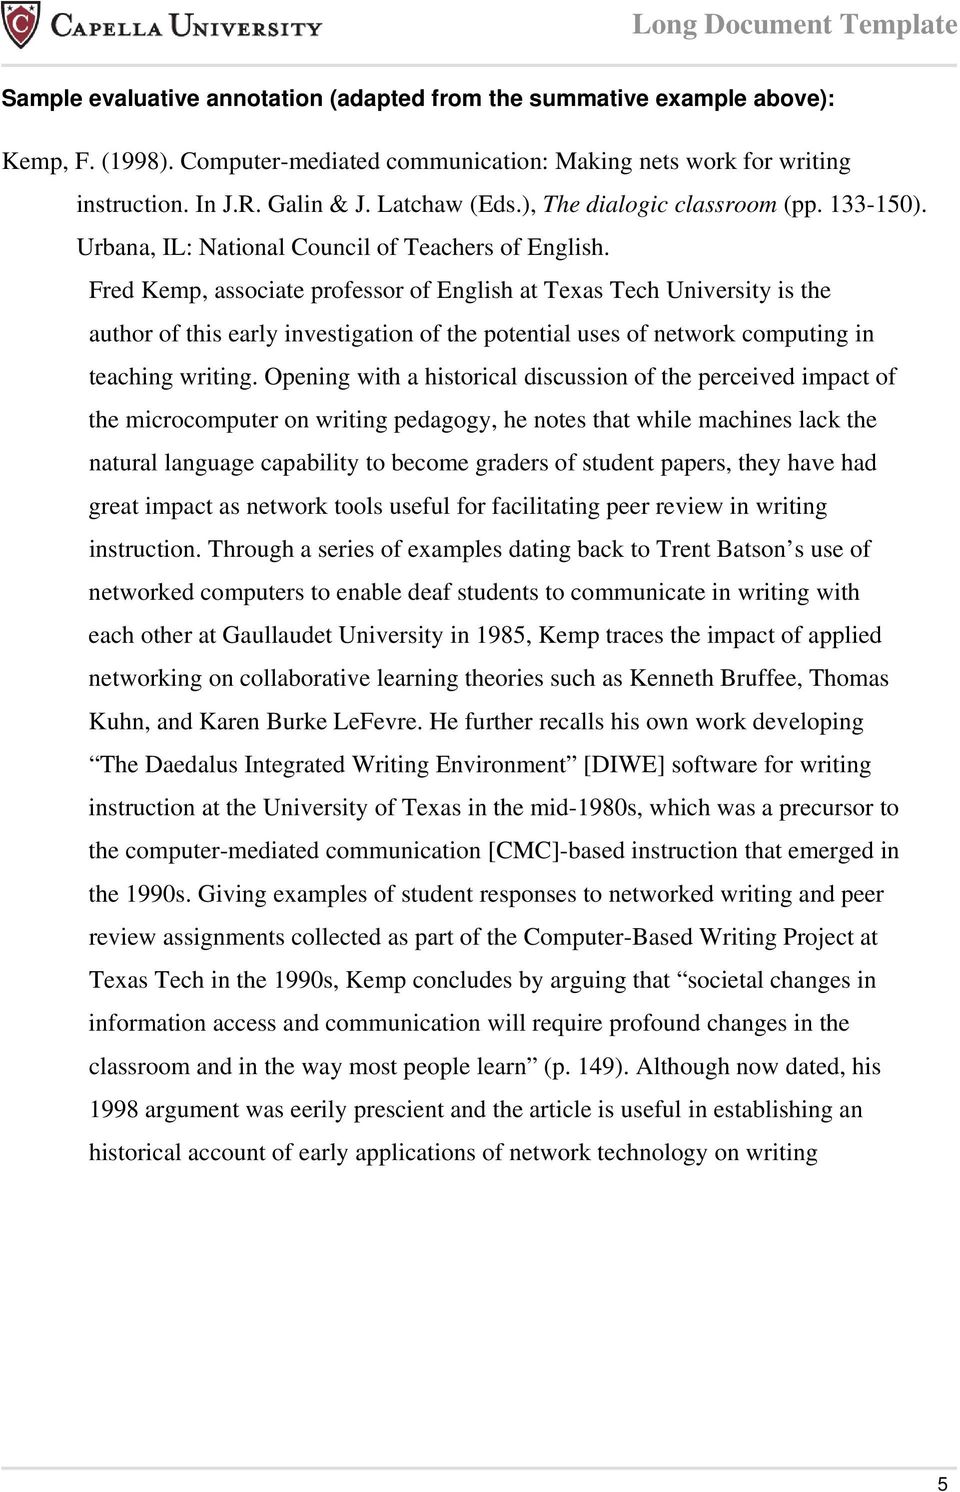 Fred Kemp, associate professor of English at Texas Tech University is the author of this early investigation of the potential uses of network computing in teaching writing.